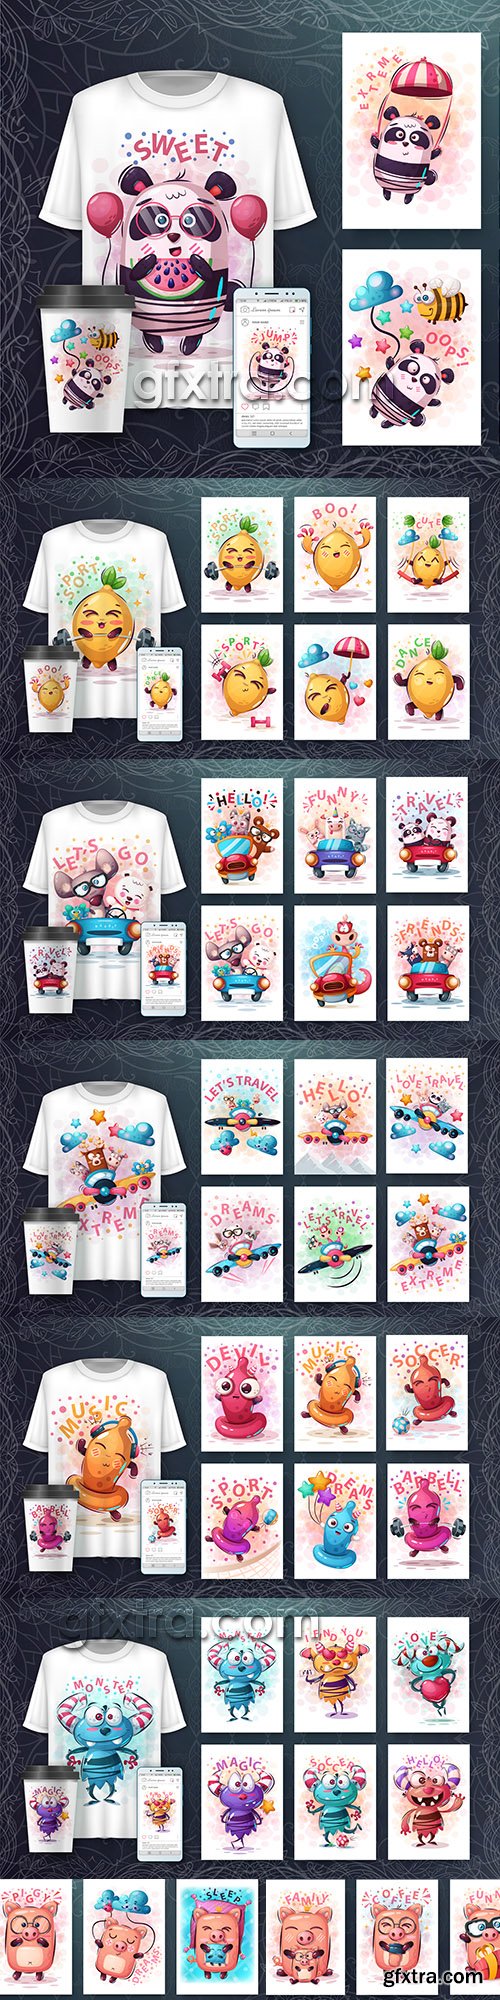 Design 3d t-shirts with mult funny characters